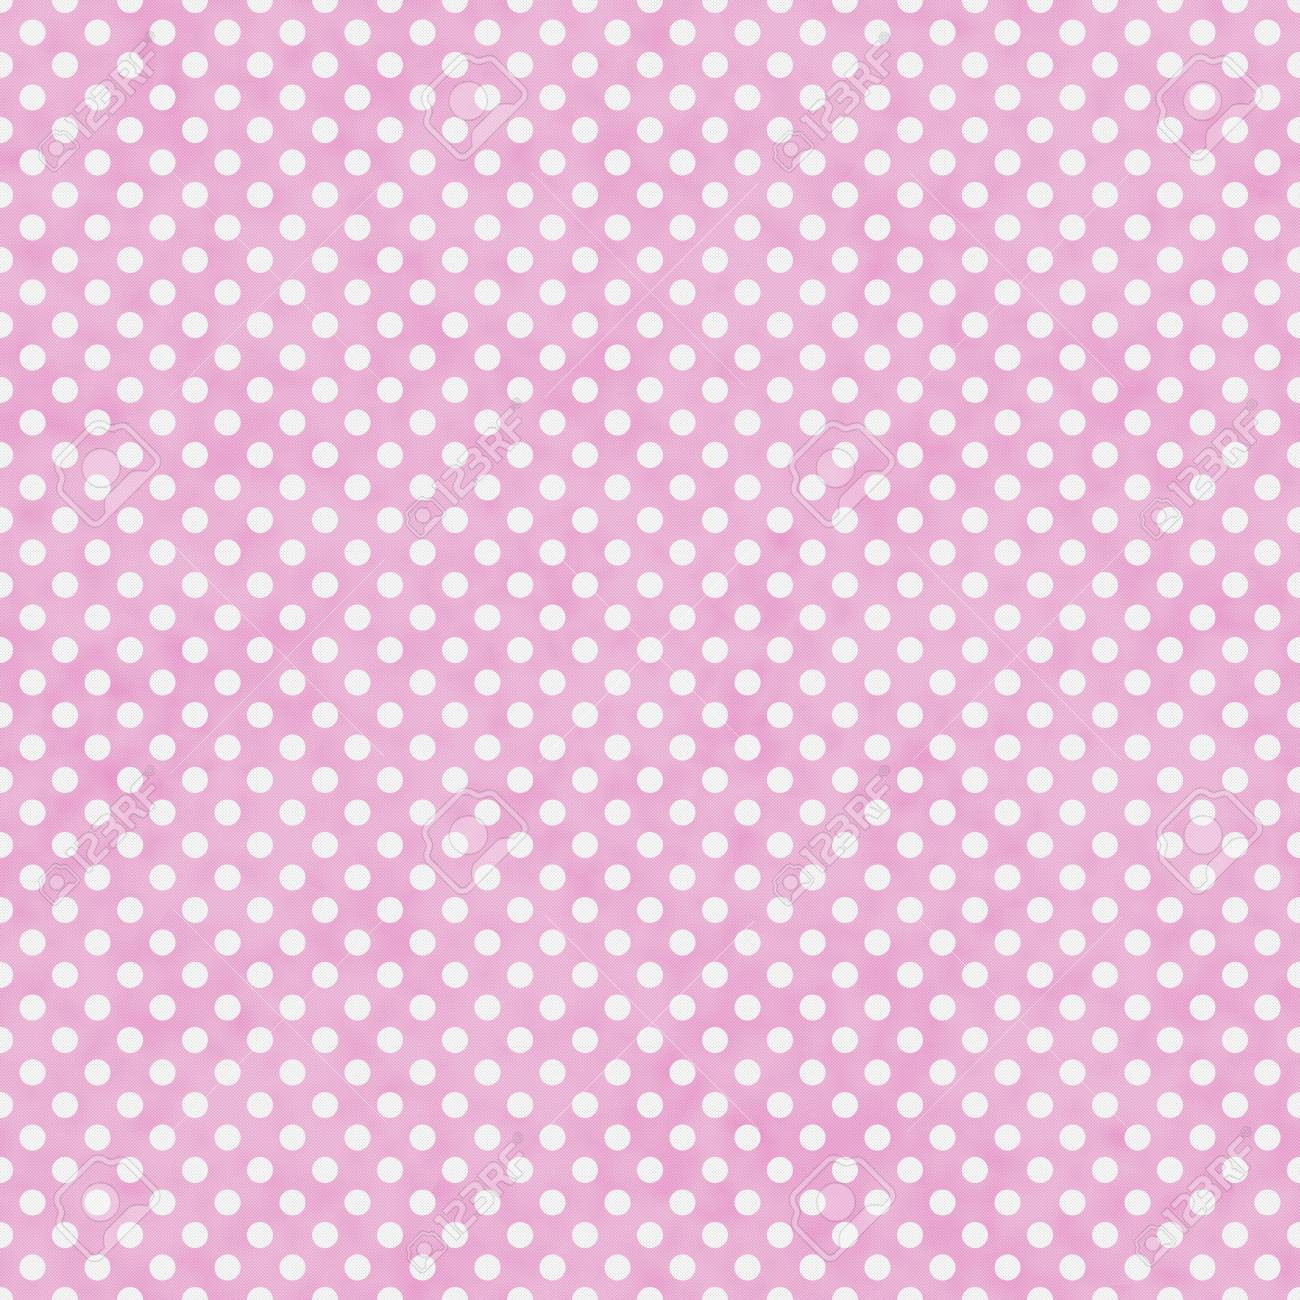 Light Pink And White Small Polka Dots Pattern Repeat Background